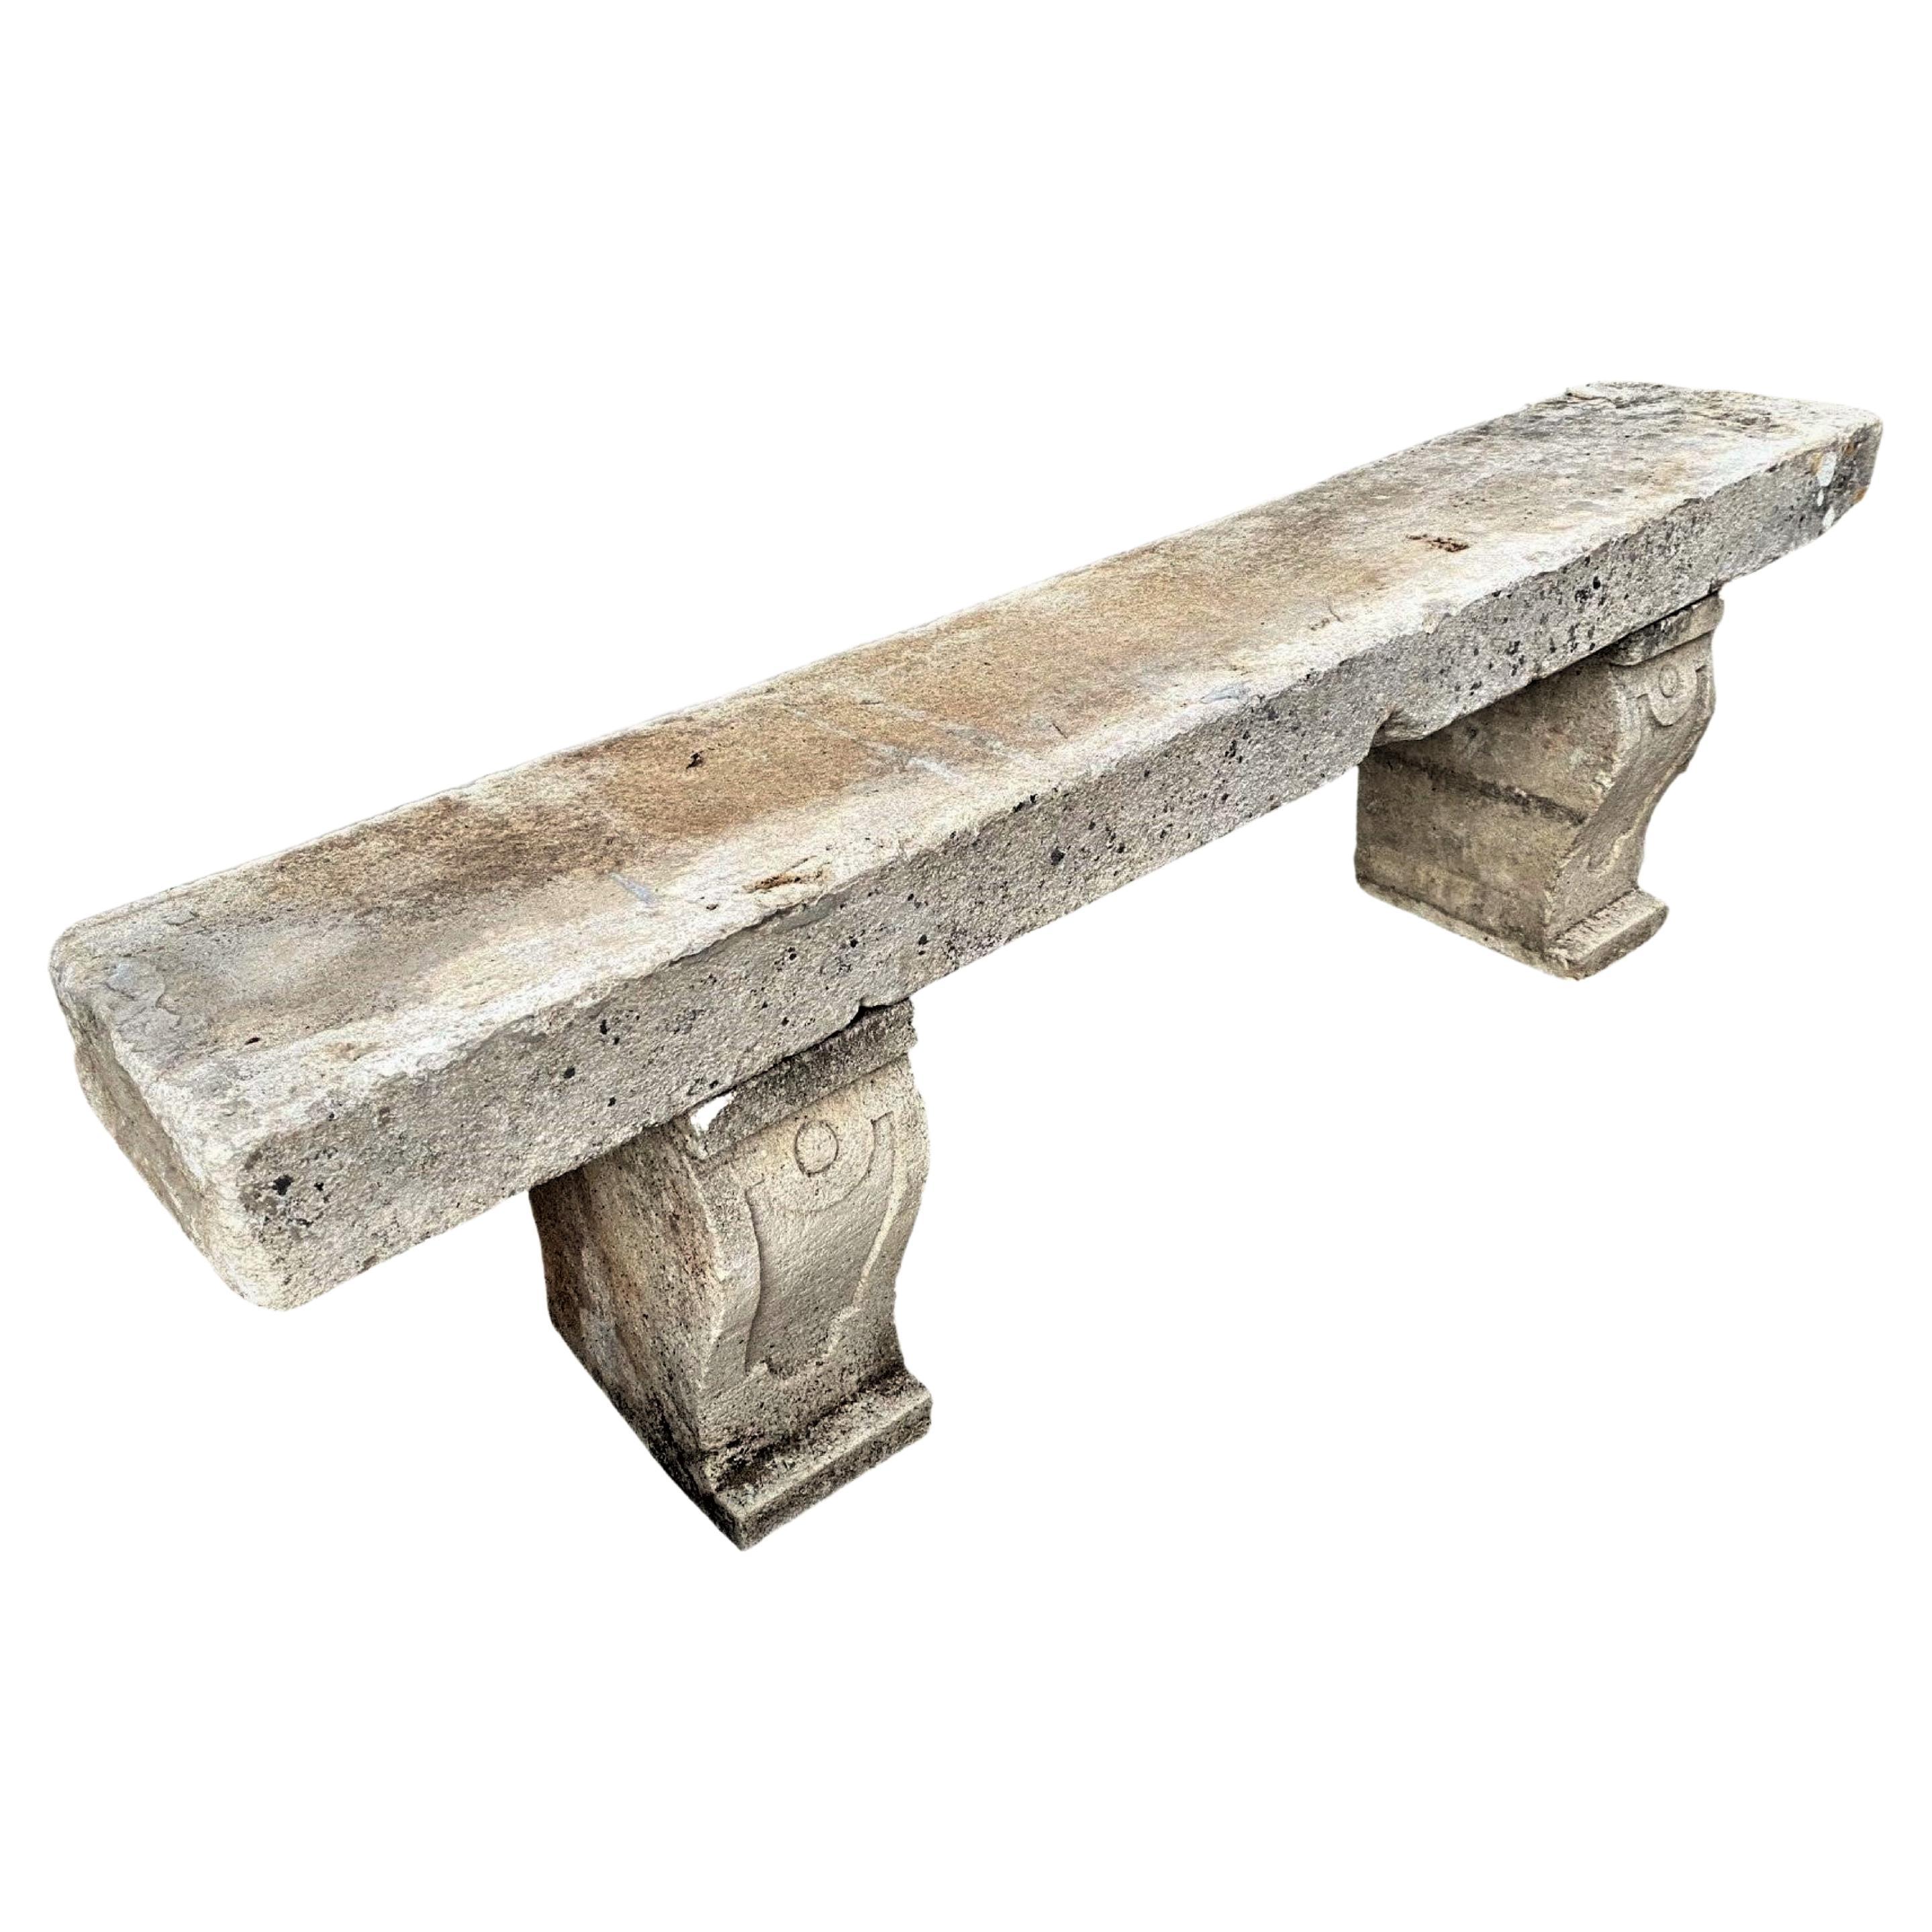 Large Stone Cast Carved Garden Bench Seat Heavy And Solid Made To Last!by DGS 